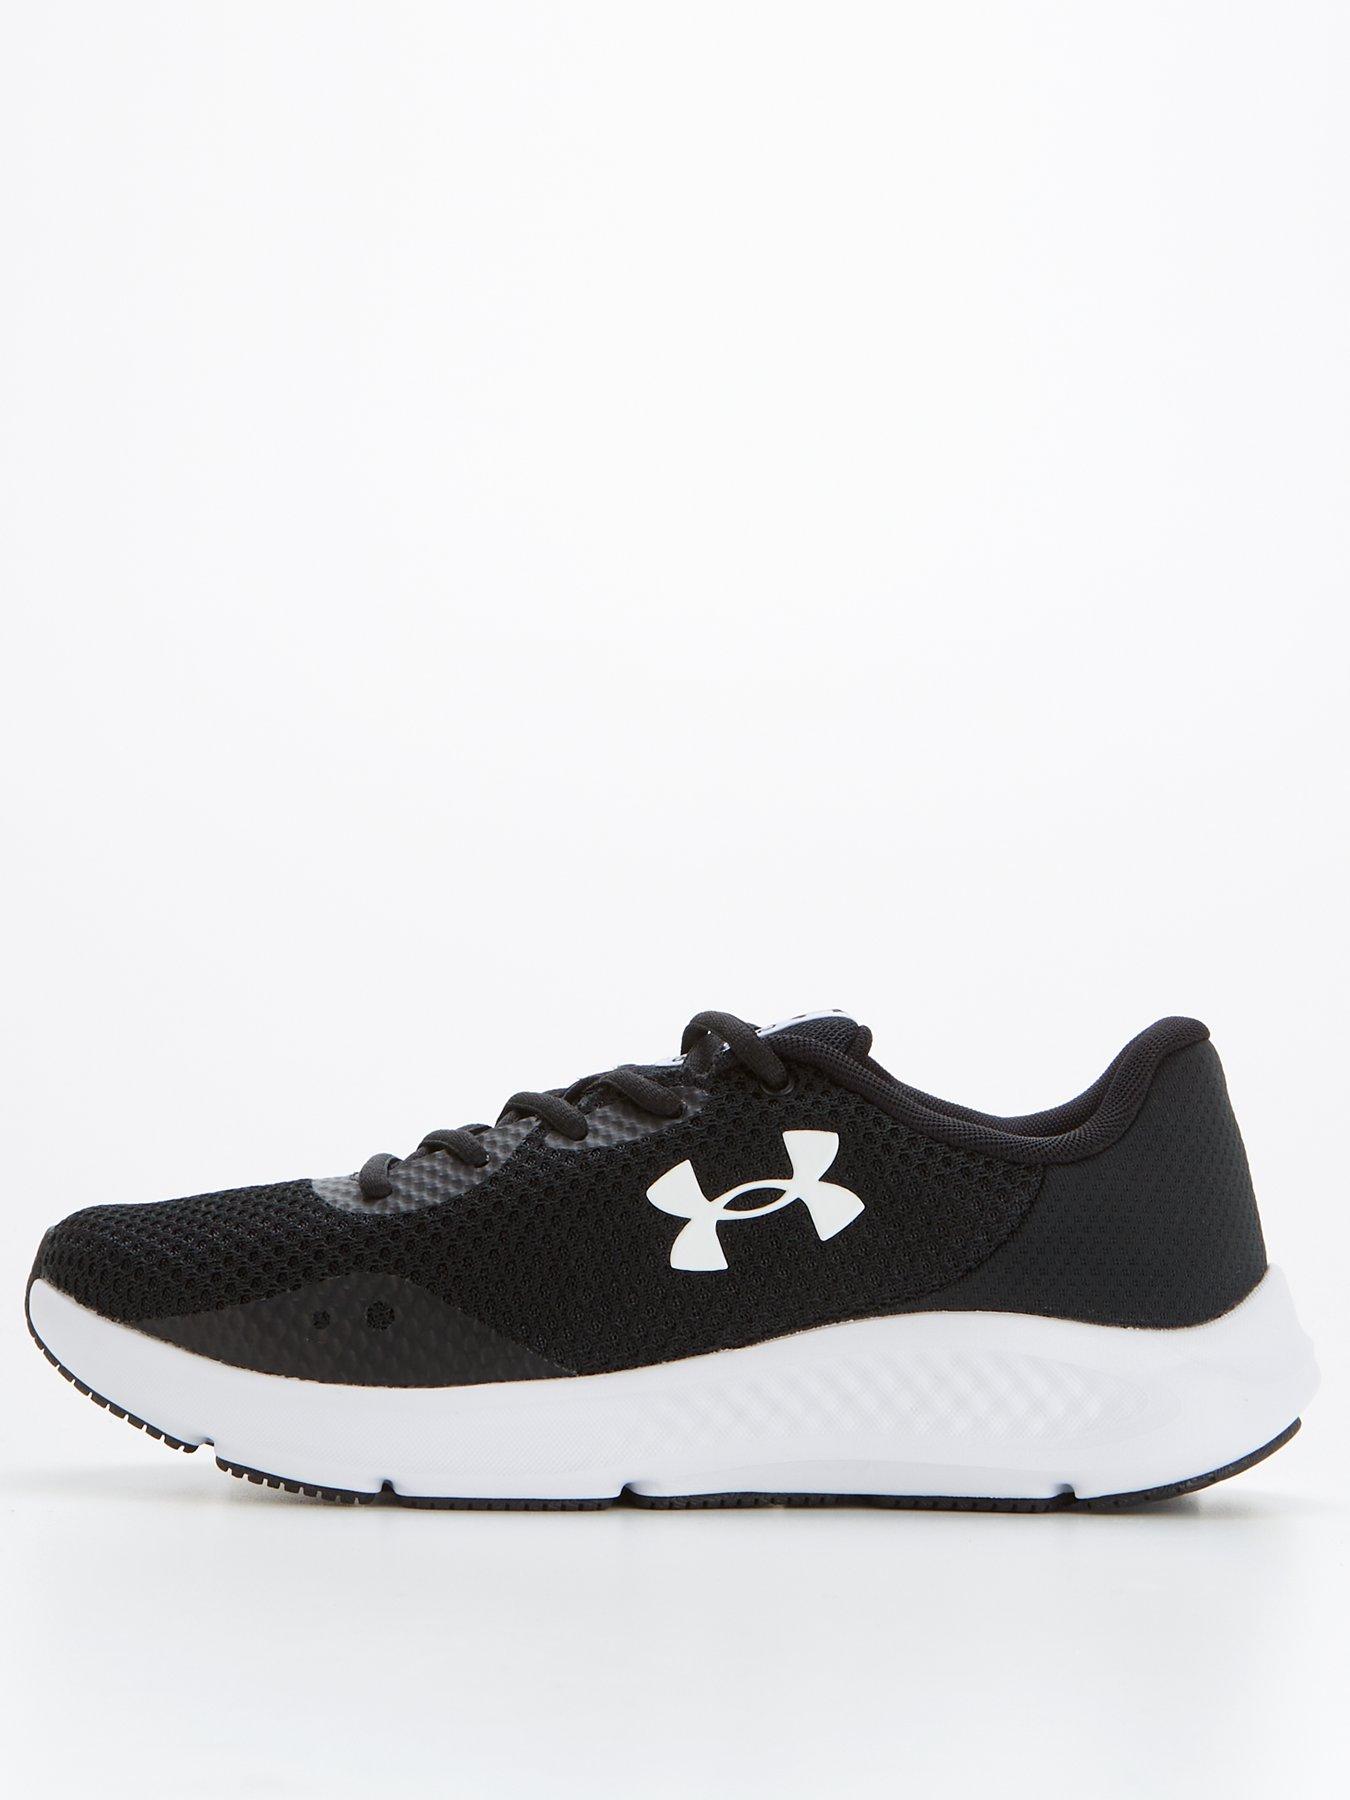 Under Armour Charged Pursuit 3 trainers in black and white